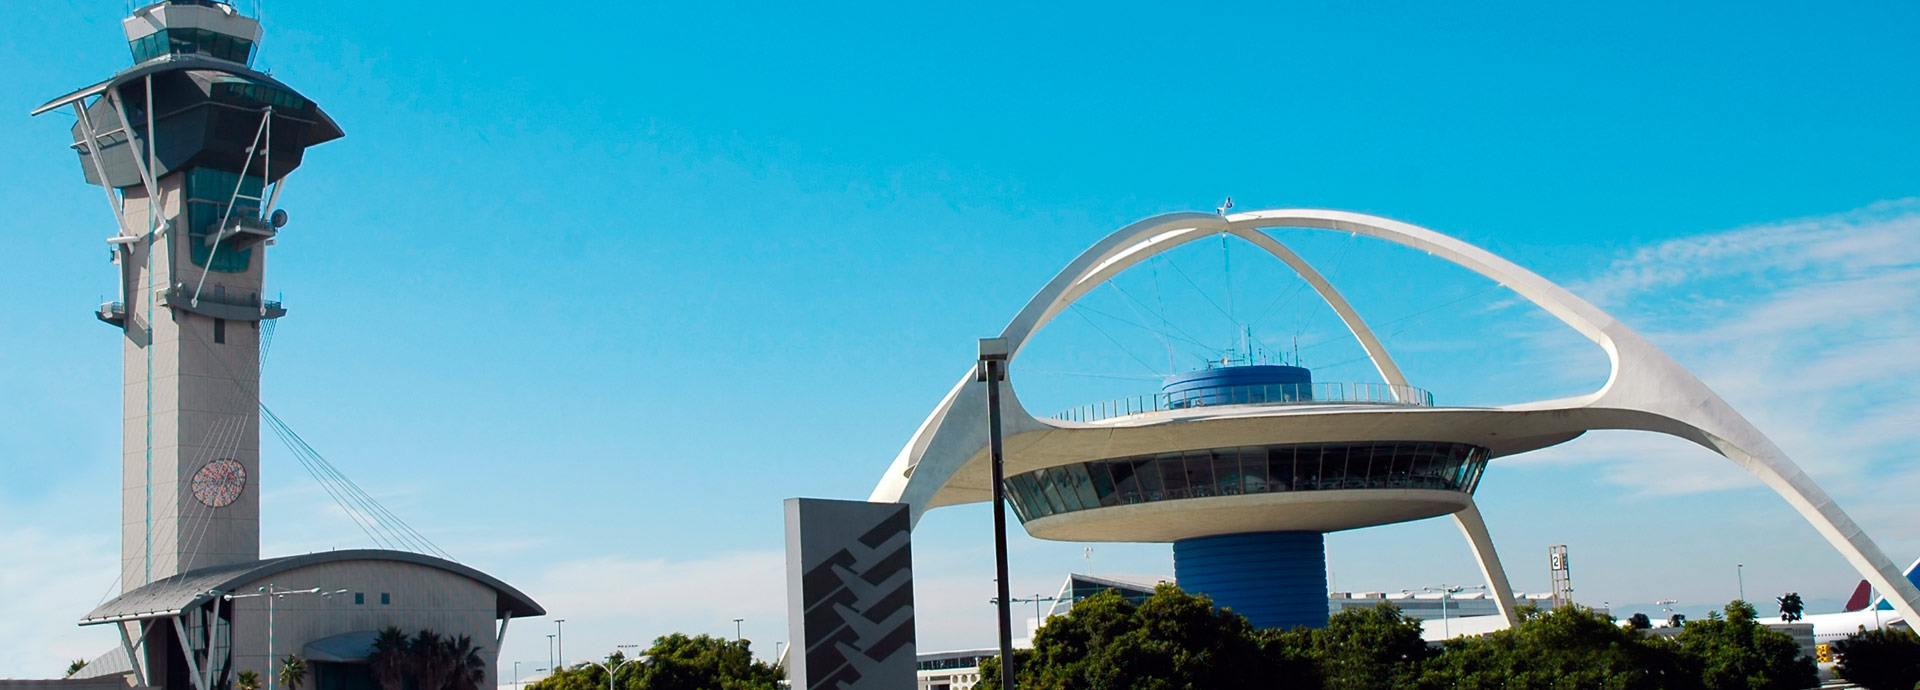 About Los Angeles International Airport